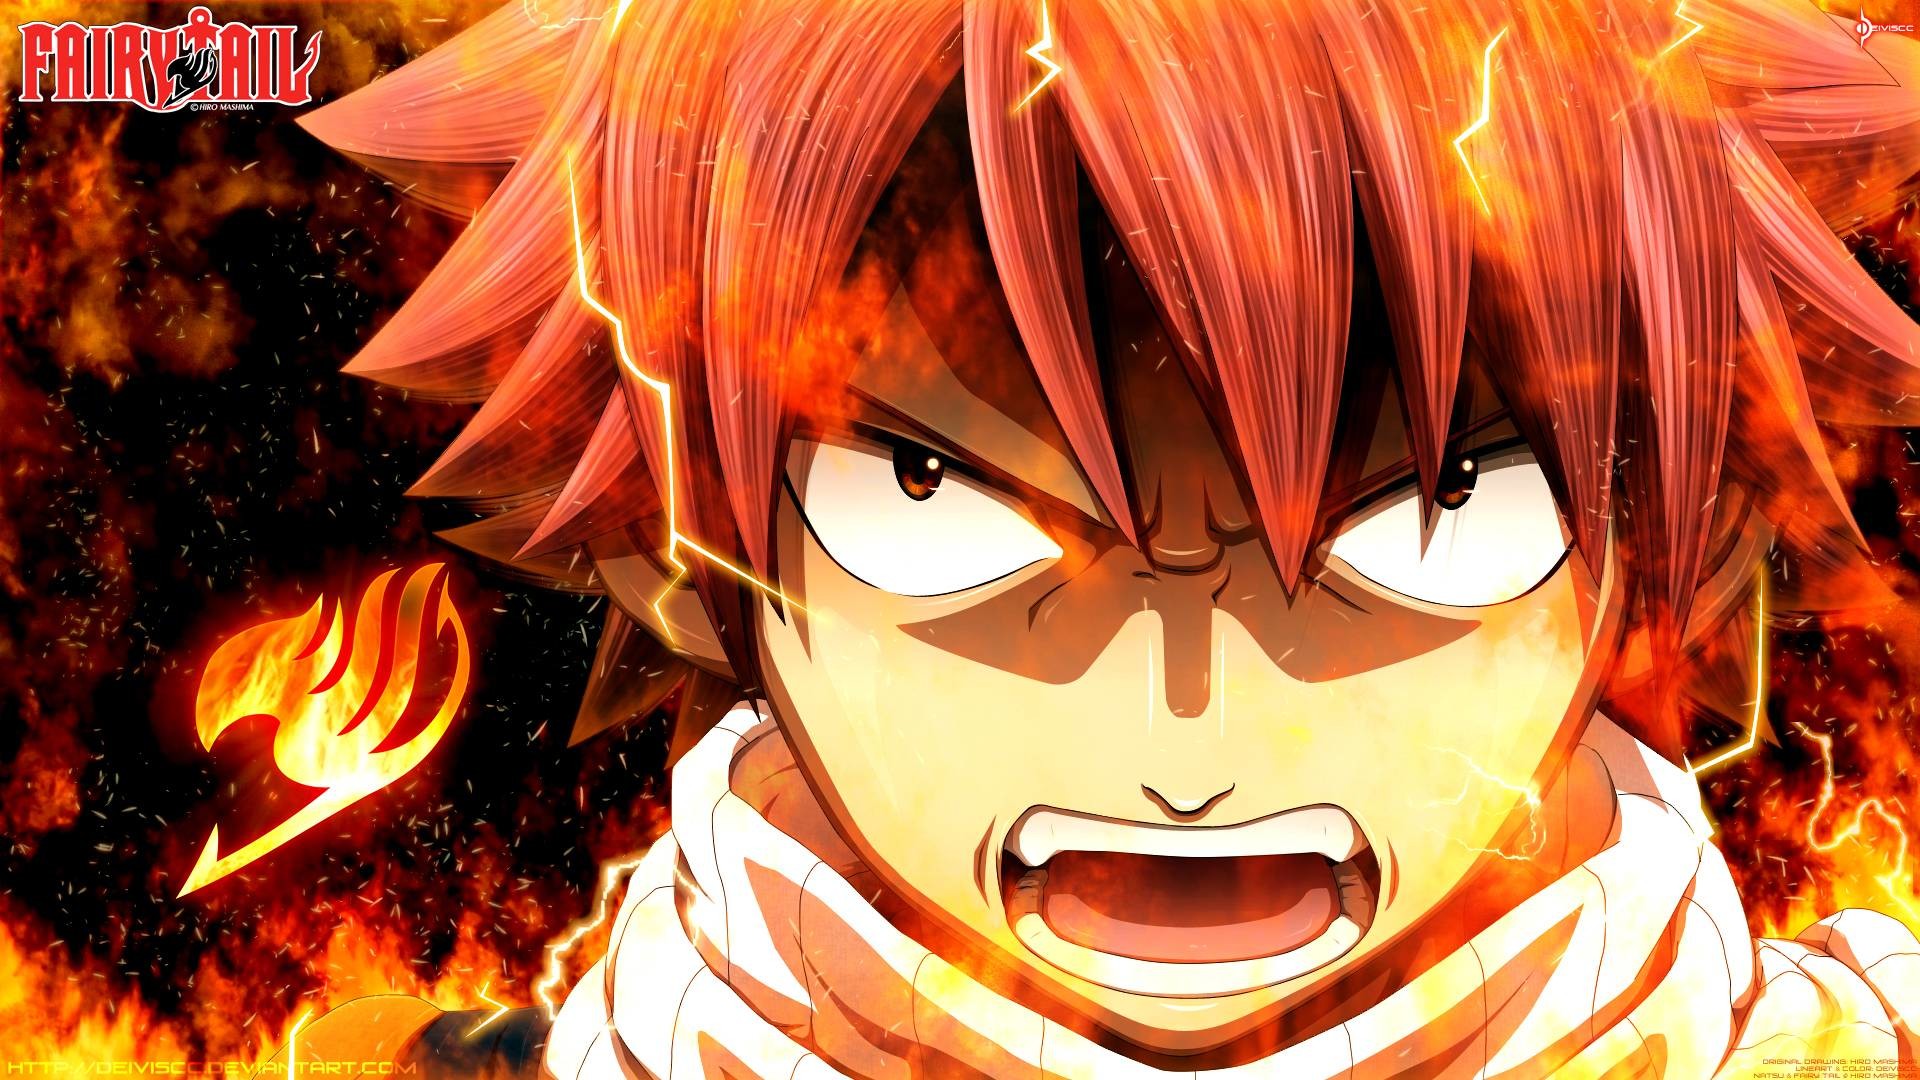 1920x1080 10 UNSEEN Fairy Tail Wallpapers! | Daily Anime Art